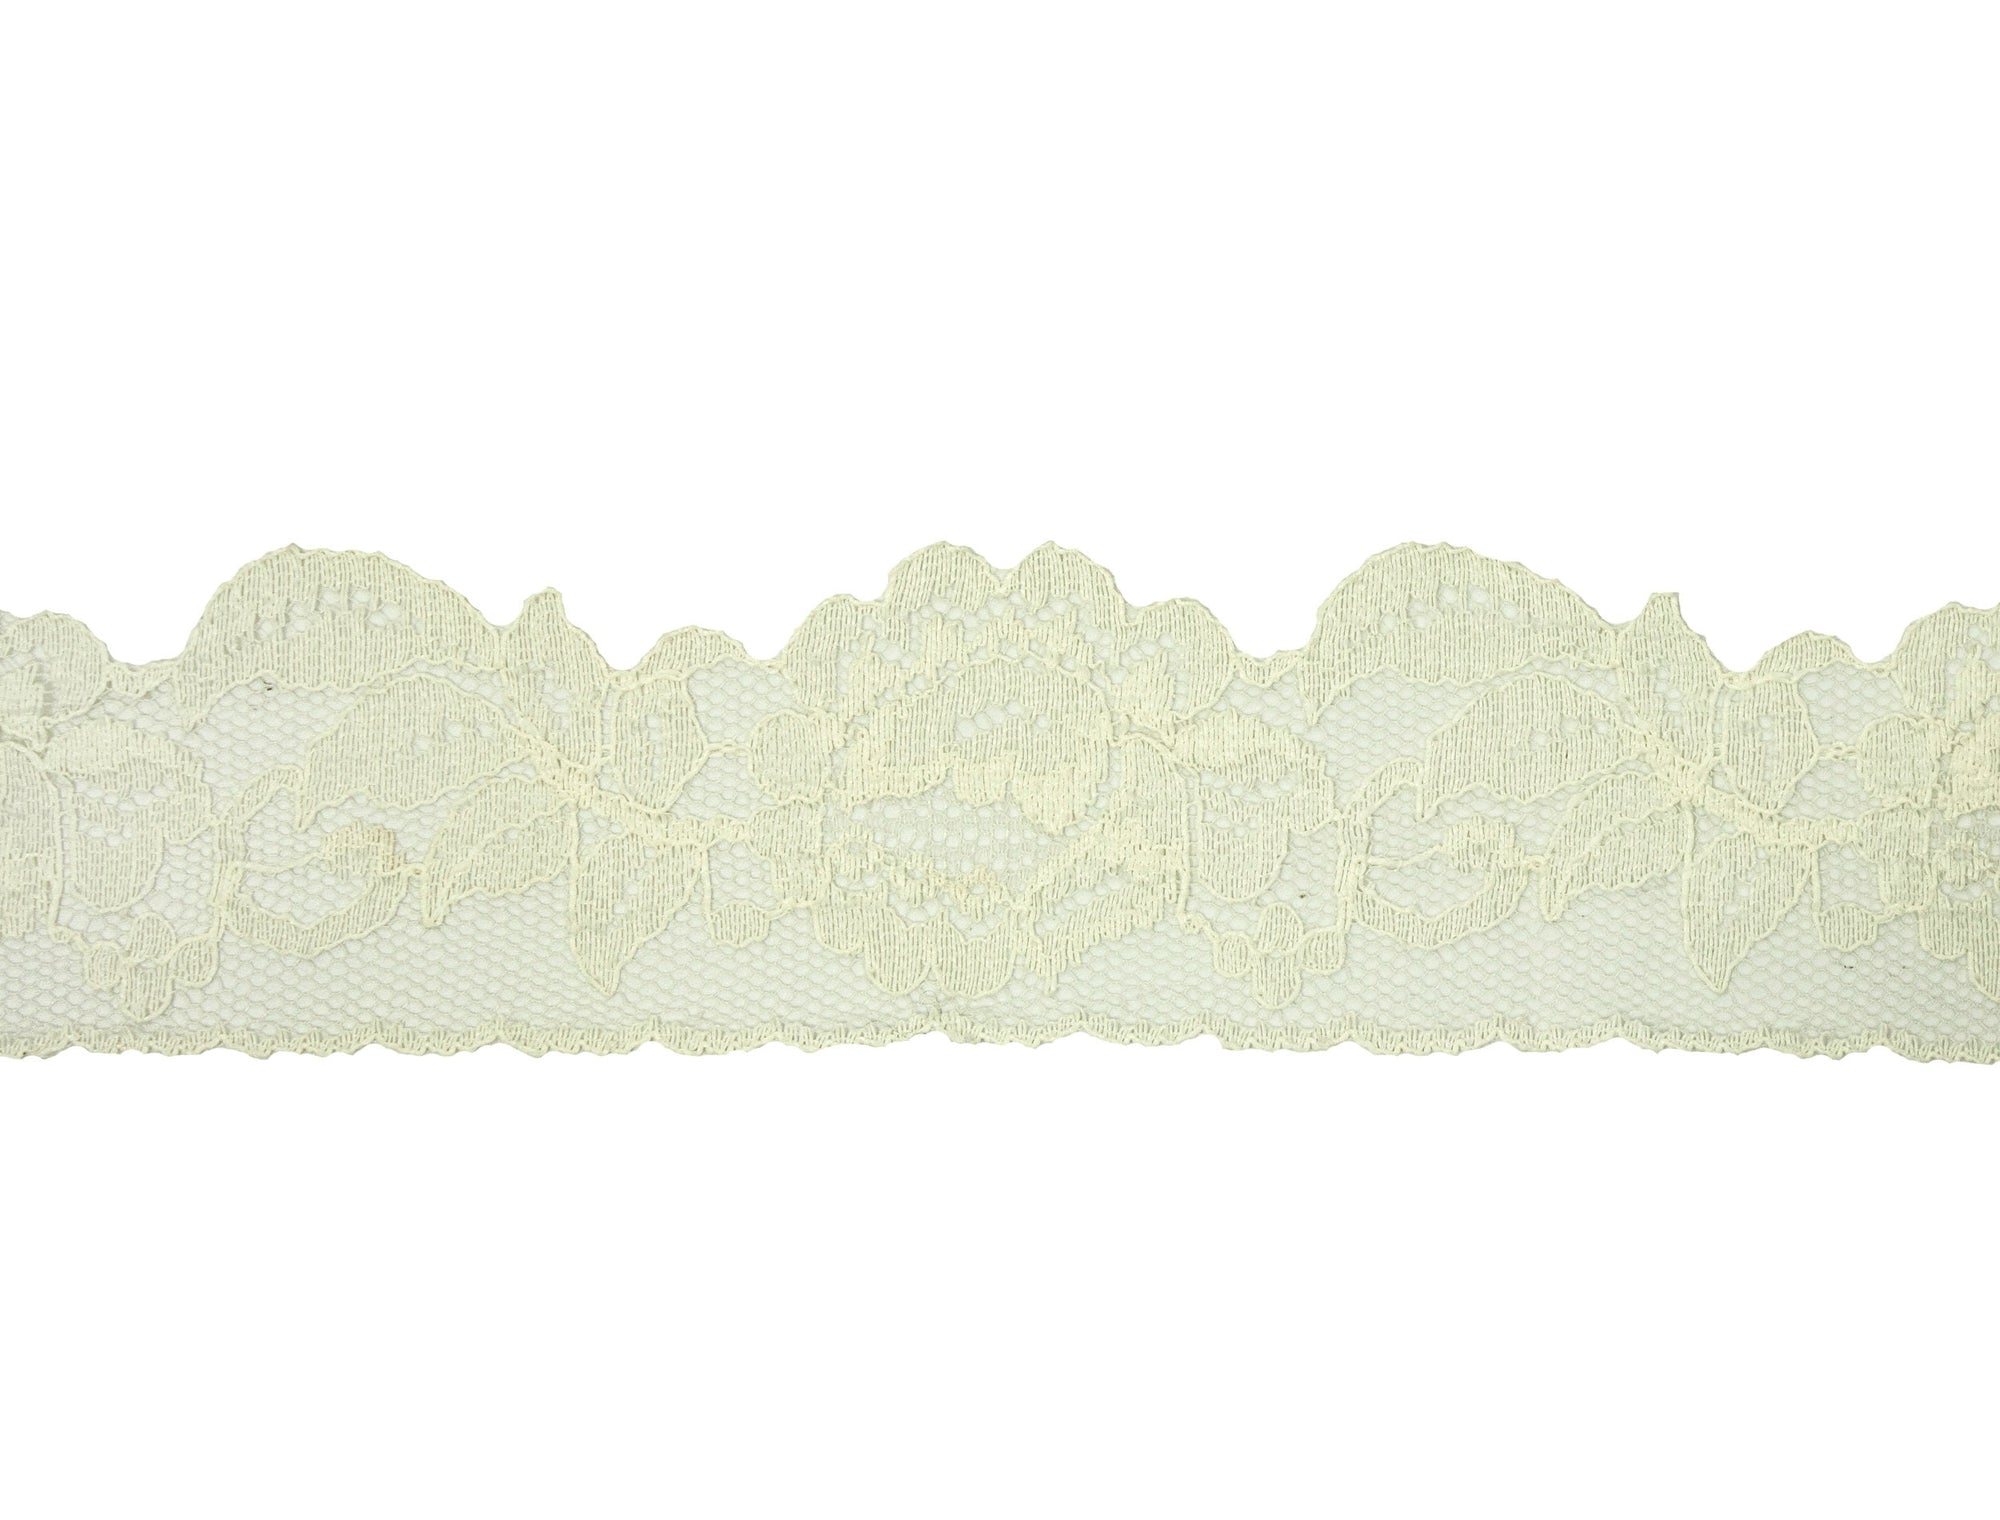 Vintage Lace Ivory Floral Scalloped Edge 2" Wide - One Piece 1 Yard 28" Length